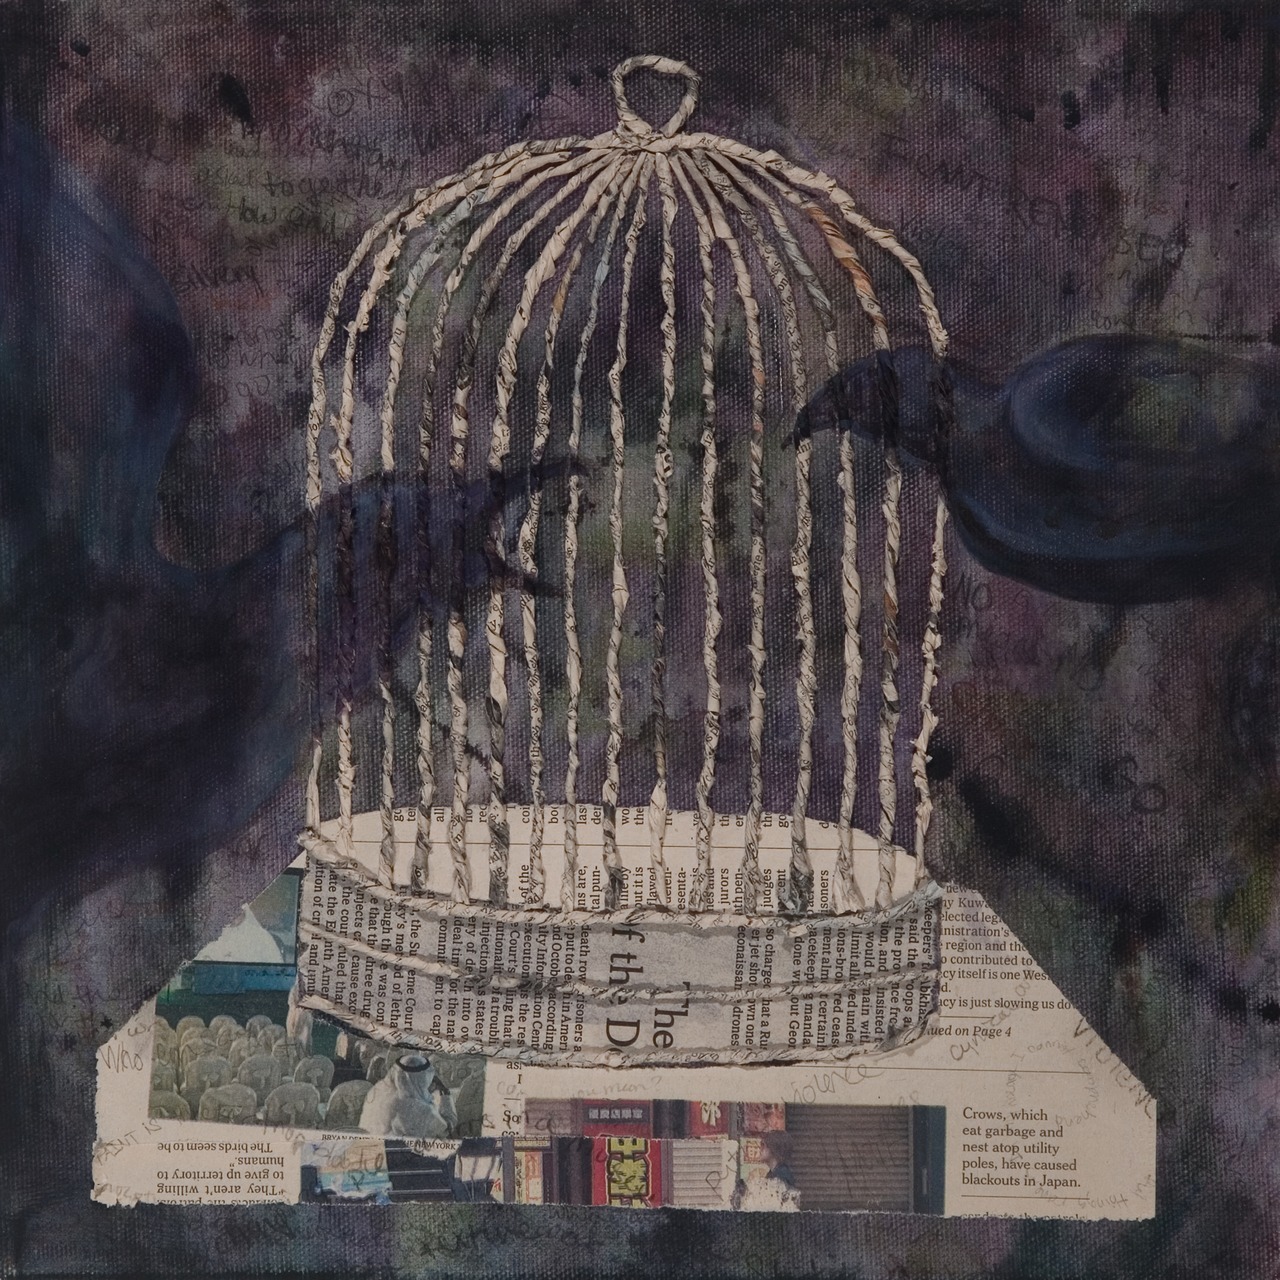 Transcending the Newspaper Cage. acrylic, pencil and newspaper